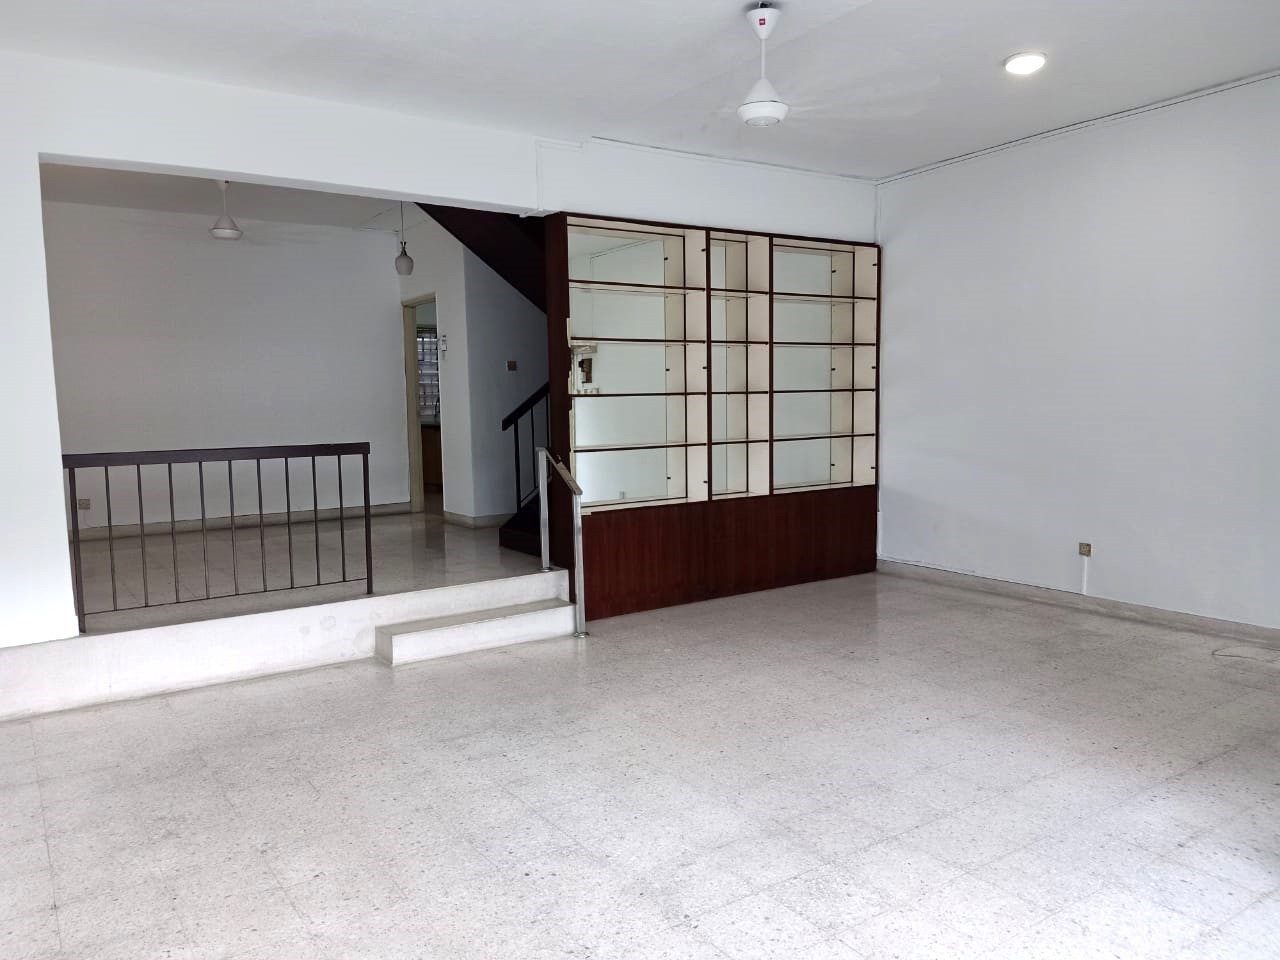 2 Storey House For Rent Taman Connaught, Cheras